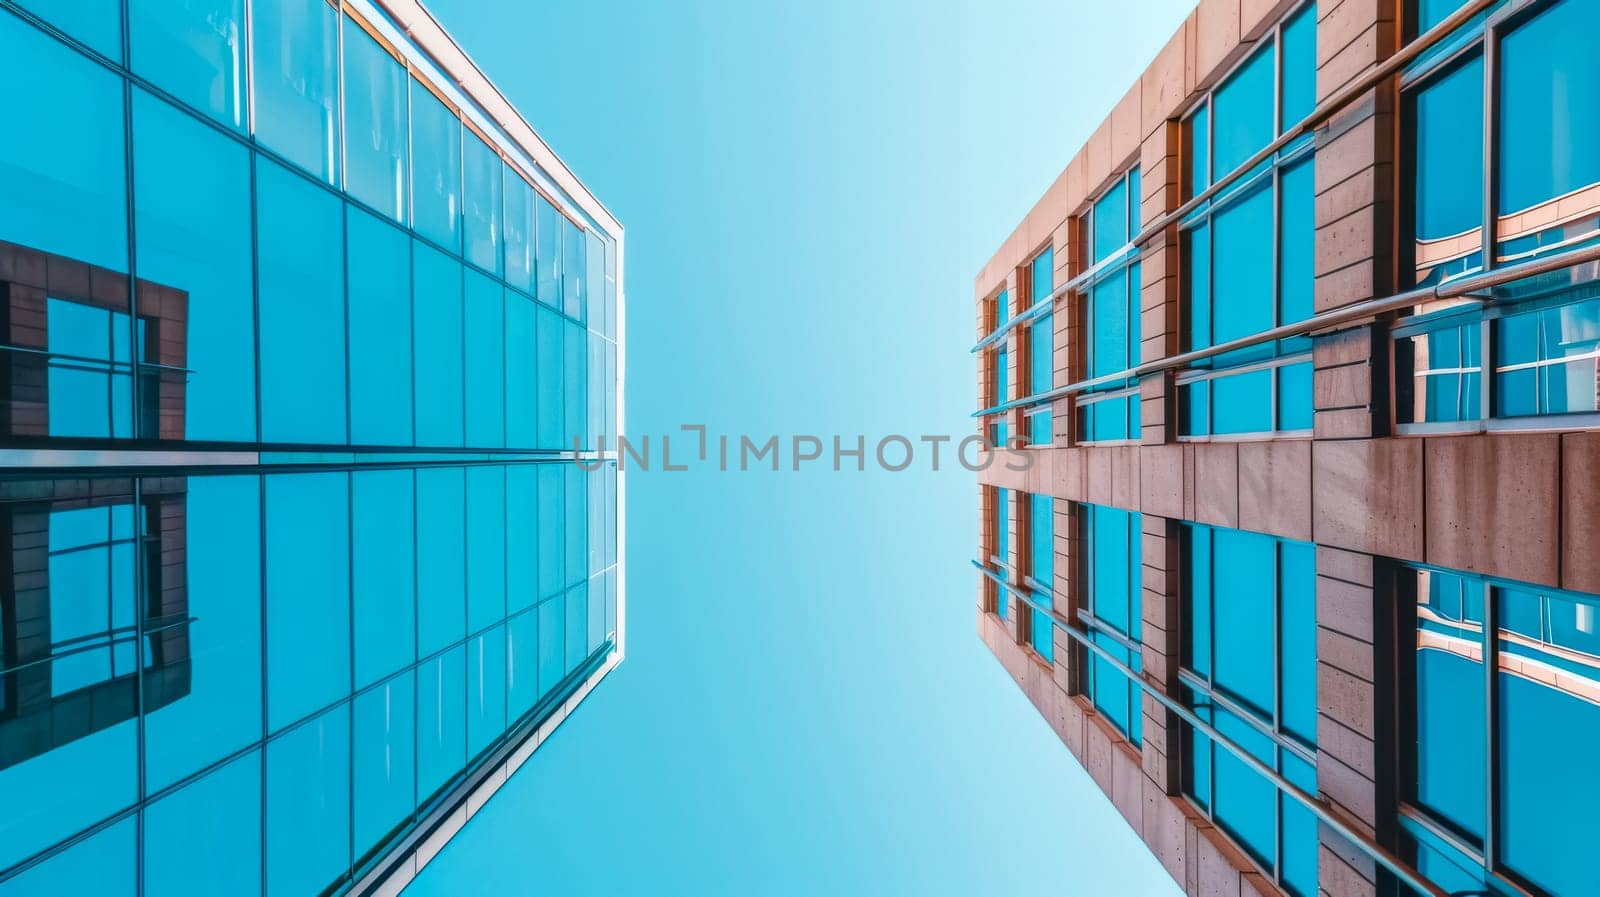 Upward view of reflective glass buildings with a clear sky